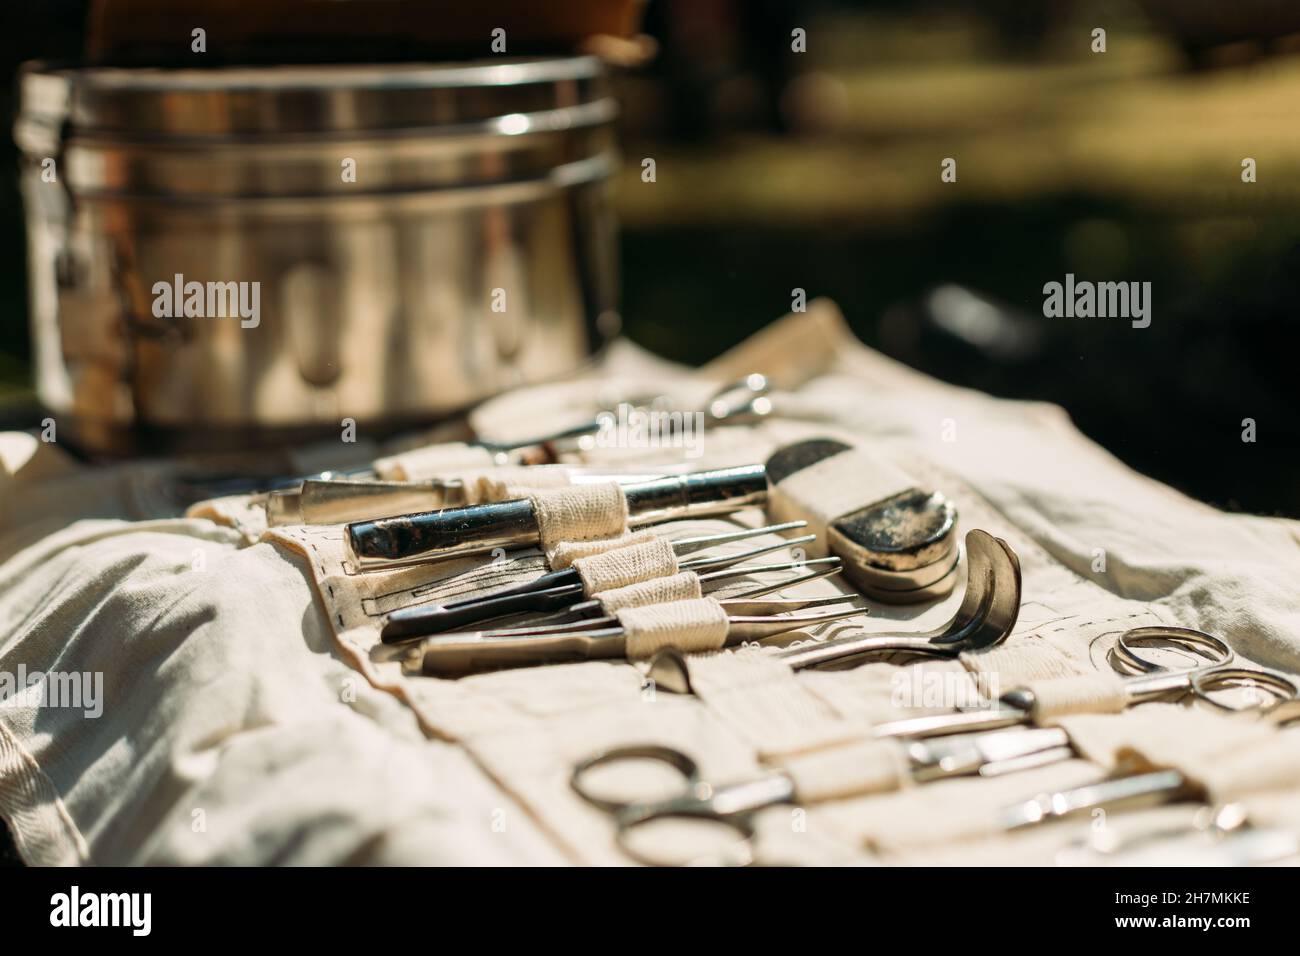 Old Medical And Surgical Instruments. Many Surgical Instruments For Surgery. Old Different Metal Medical Instruments Objects. Retro Stainless Surgical Stock Photo